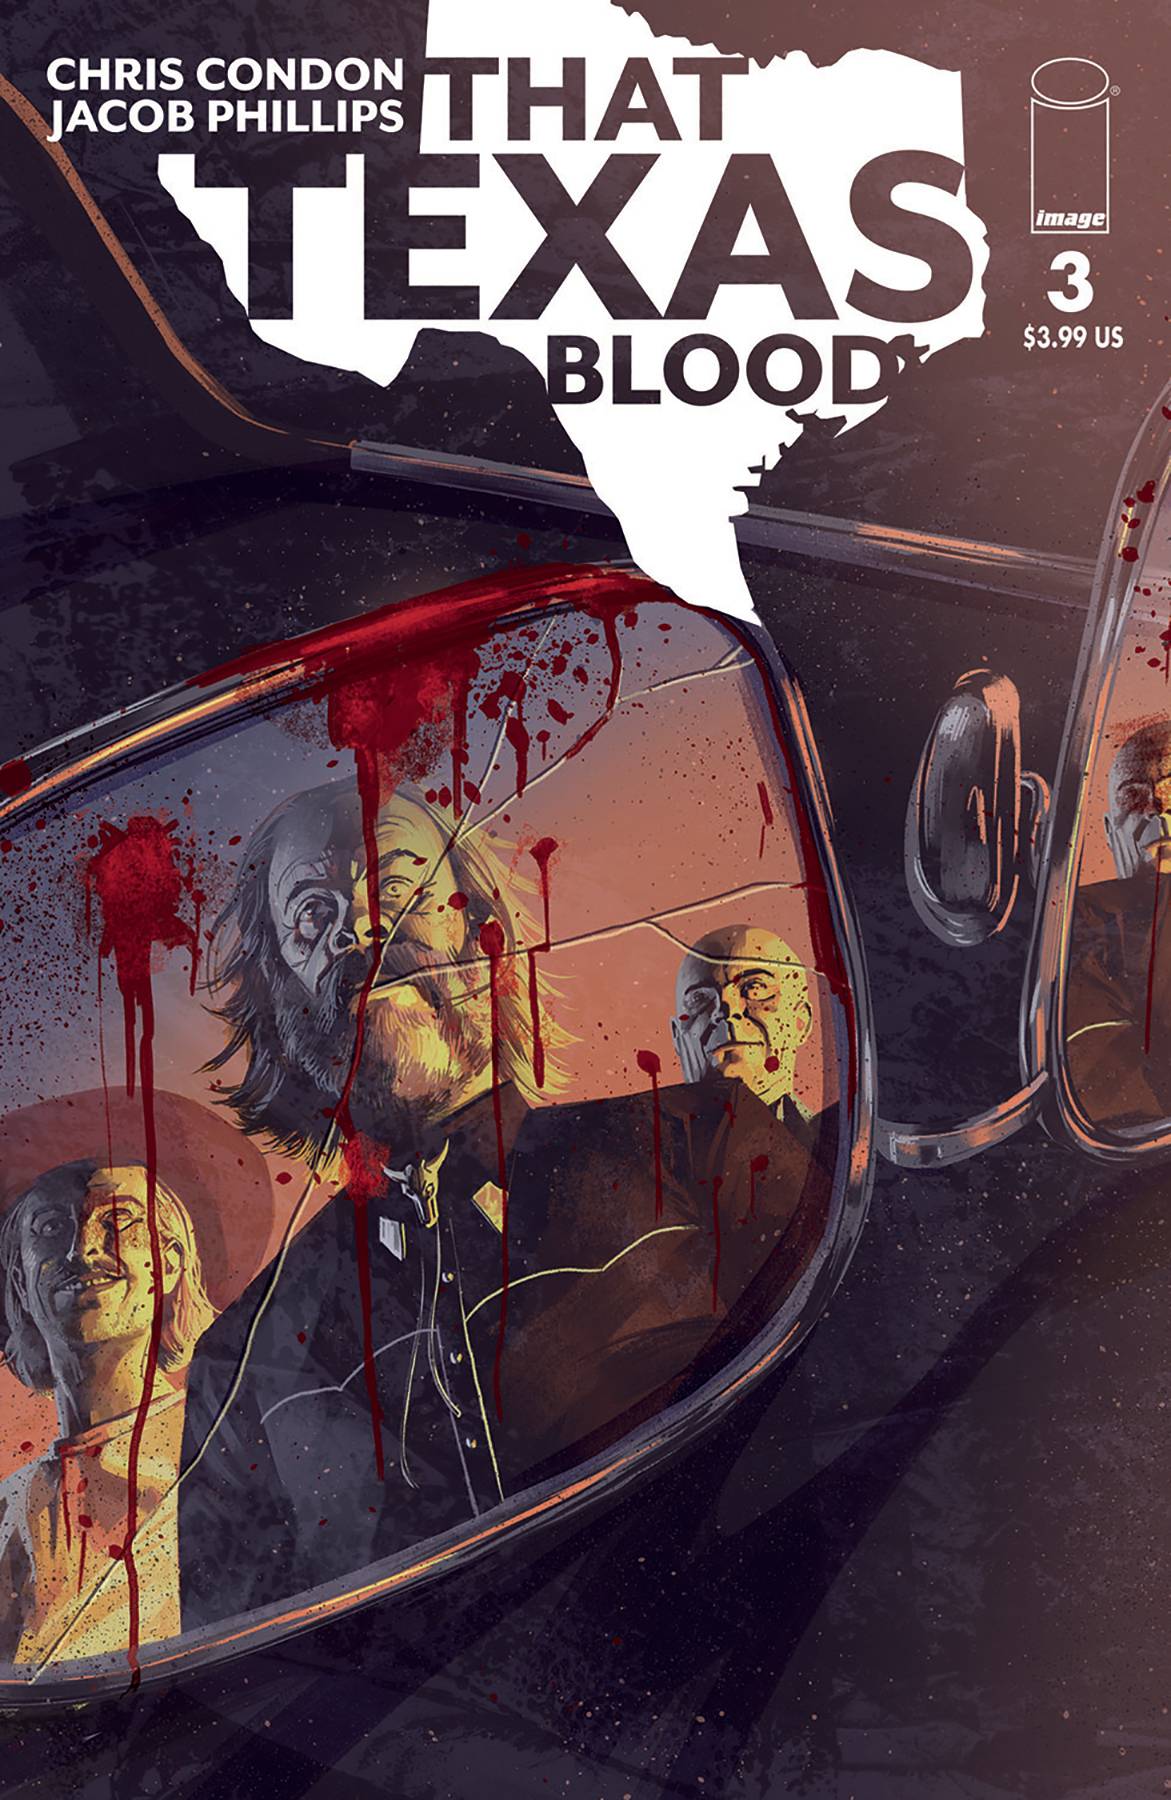 Photo of That Texas Blood Issue 3 (MR) comic sold by Stronghold Collectibles